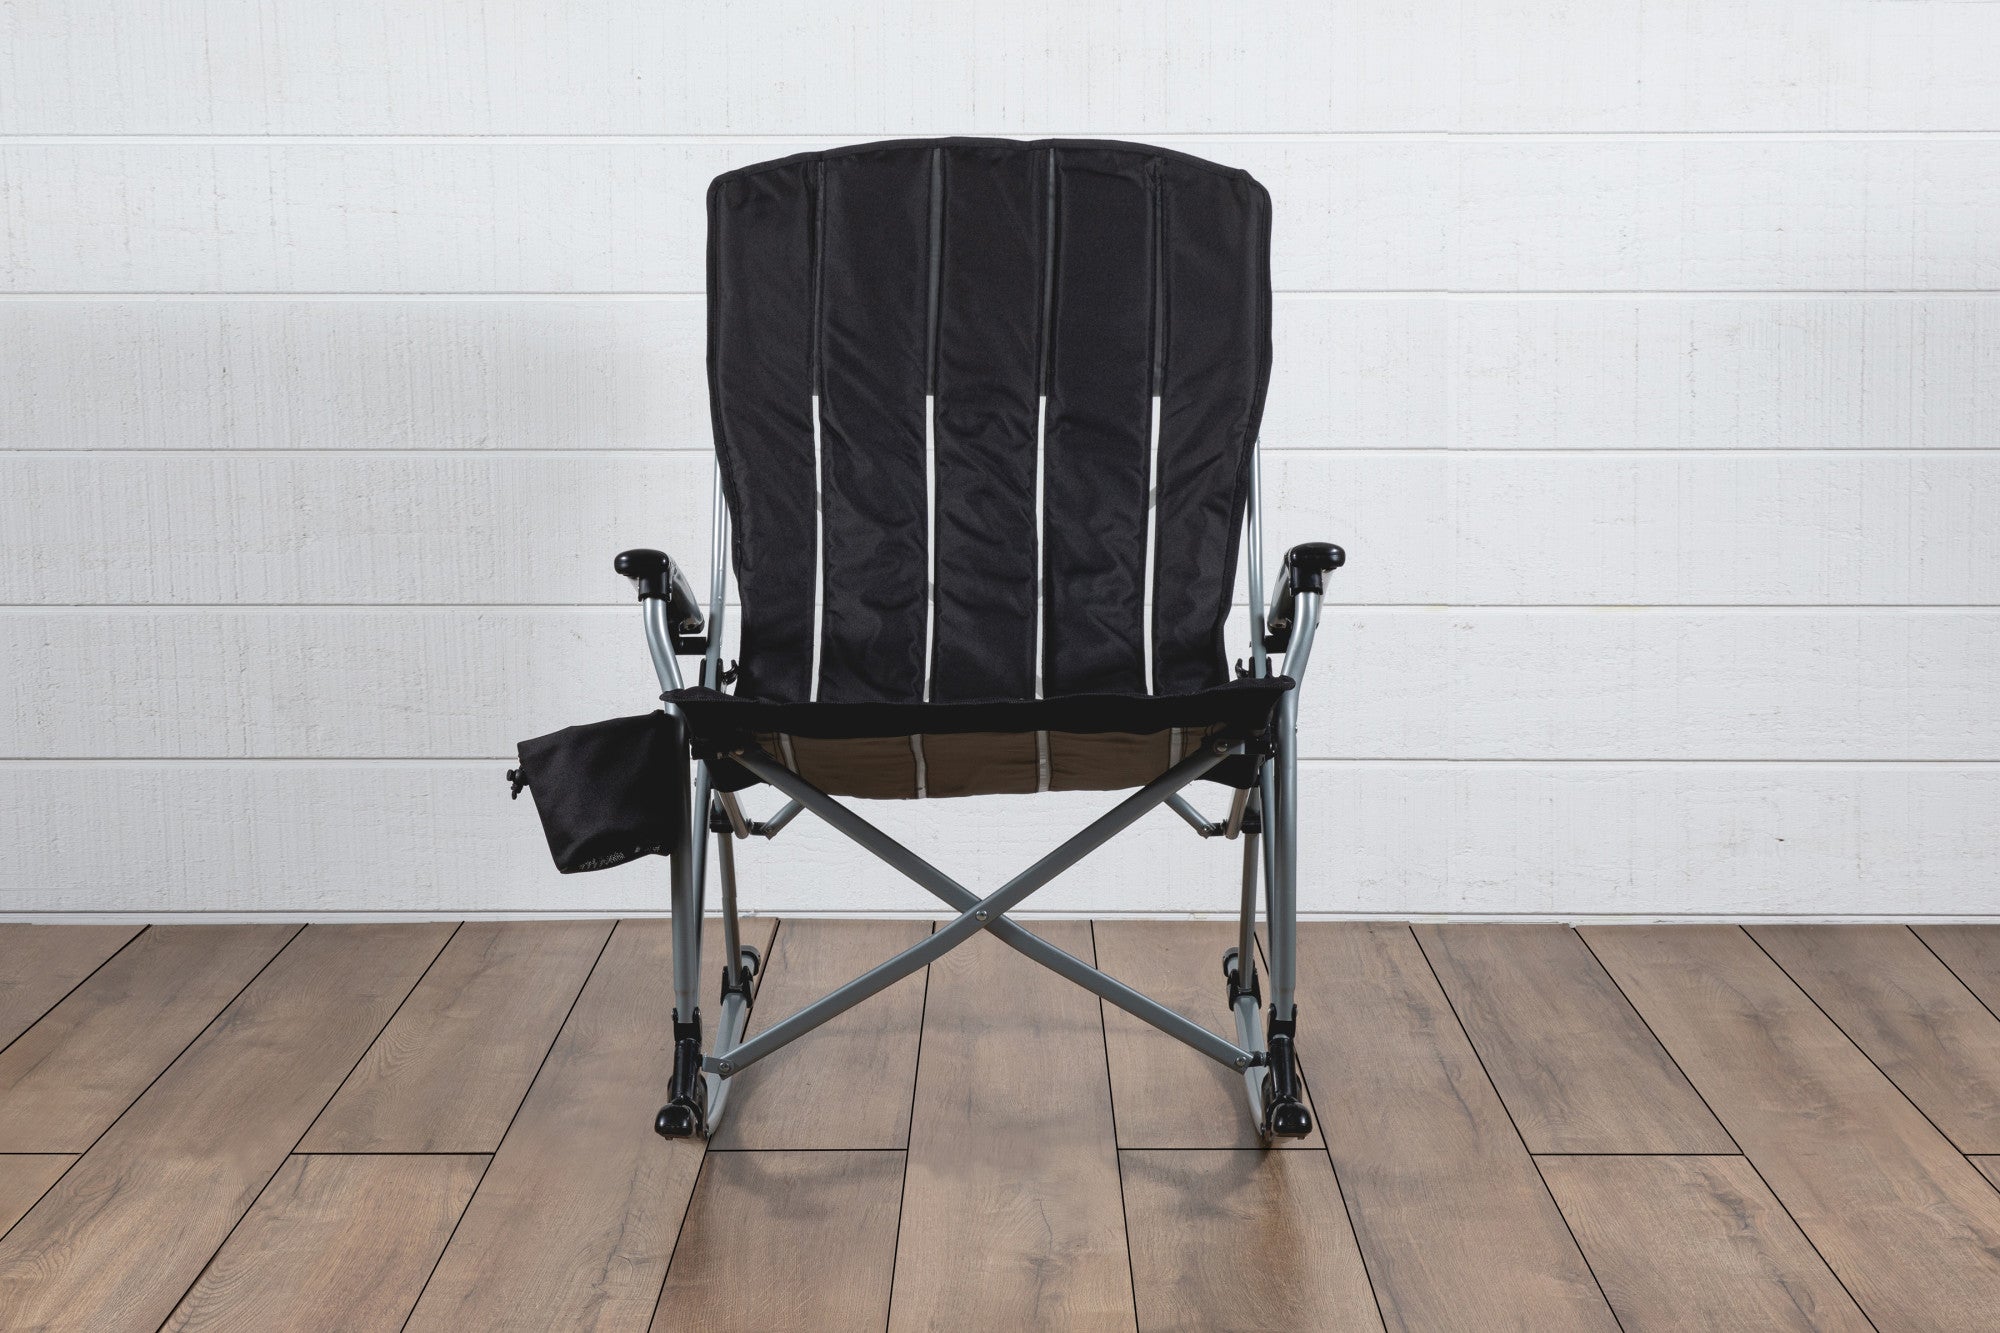 Oakland Athletics - Outdoor Rocking Camp Chair